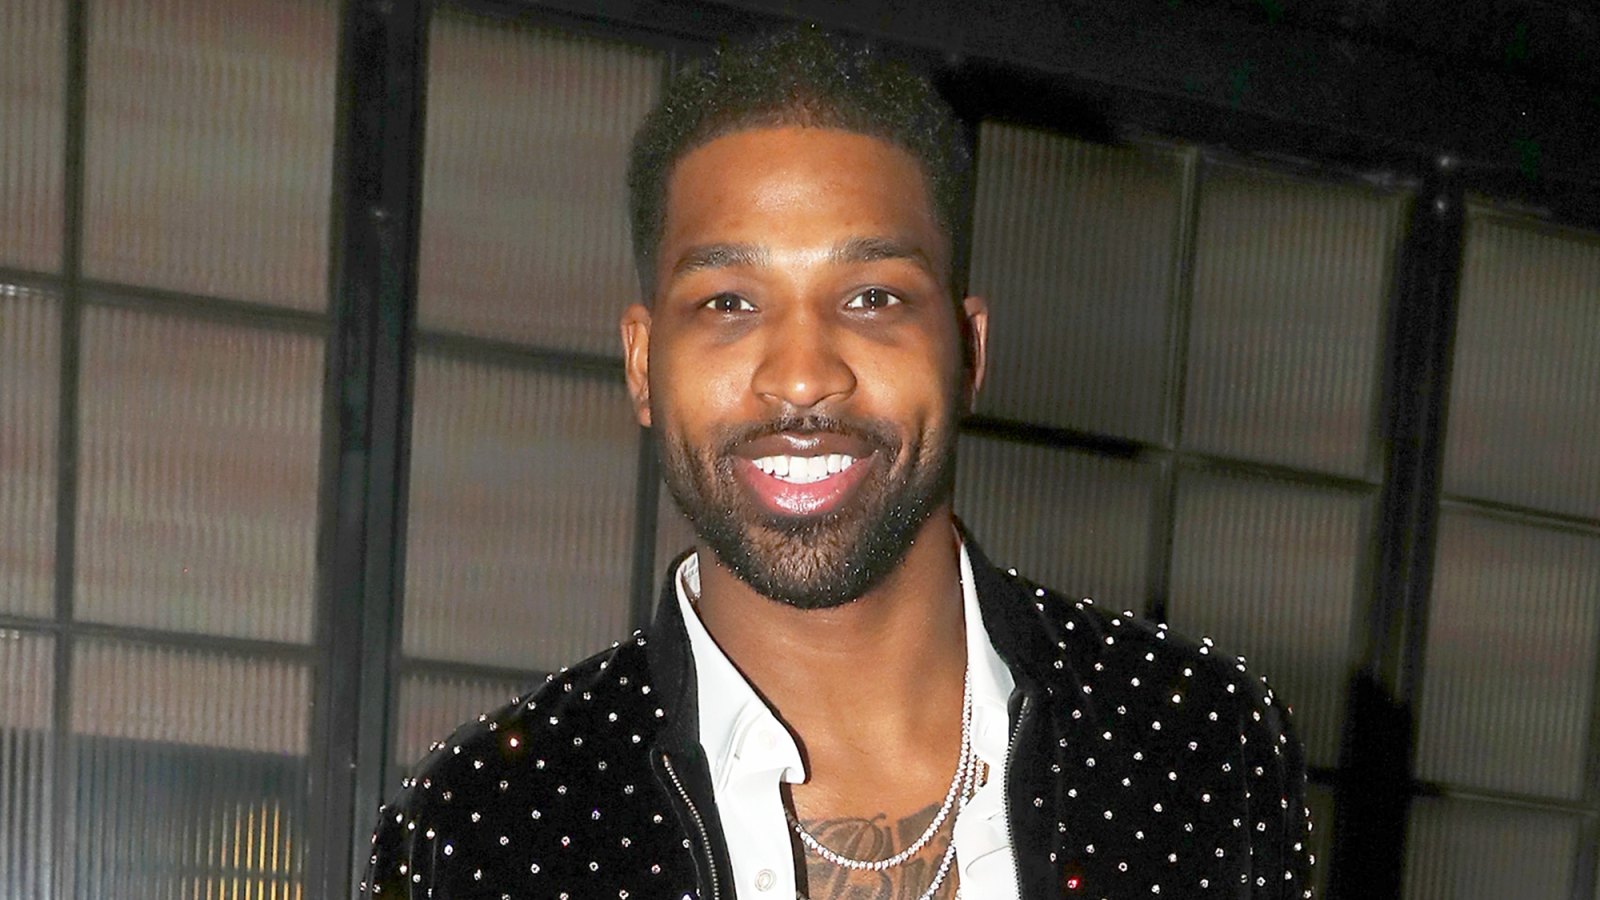 Tristan Thompson attends Remy Martin 2018 Viewing Party at Luchini Pizzeria and Bar in Los Angeles, California.